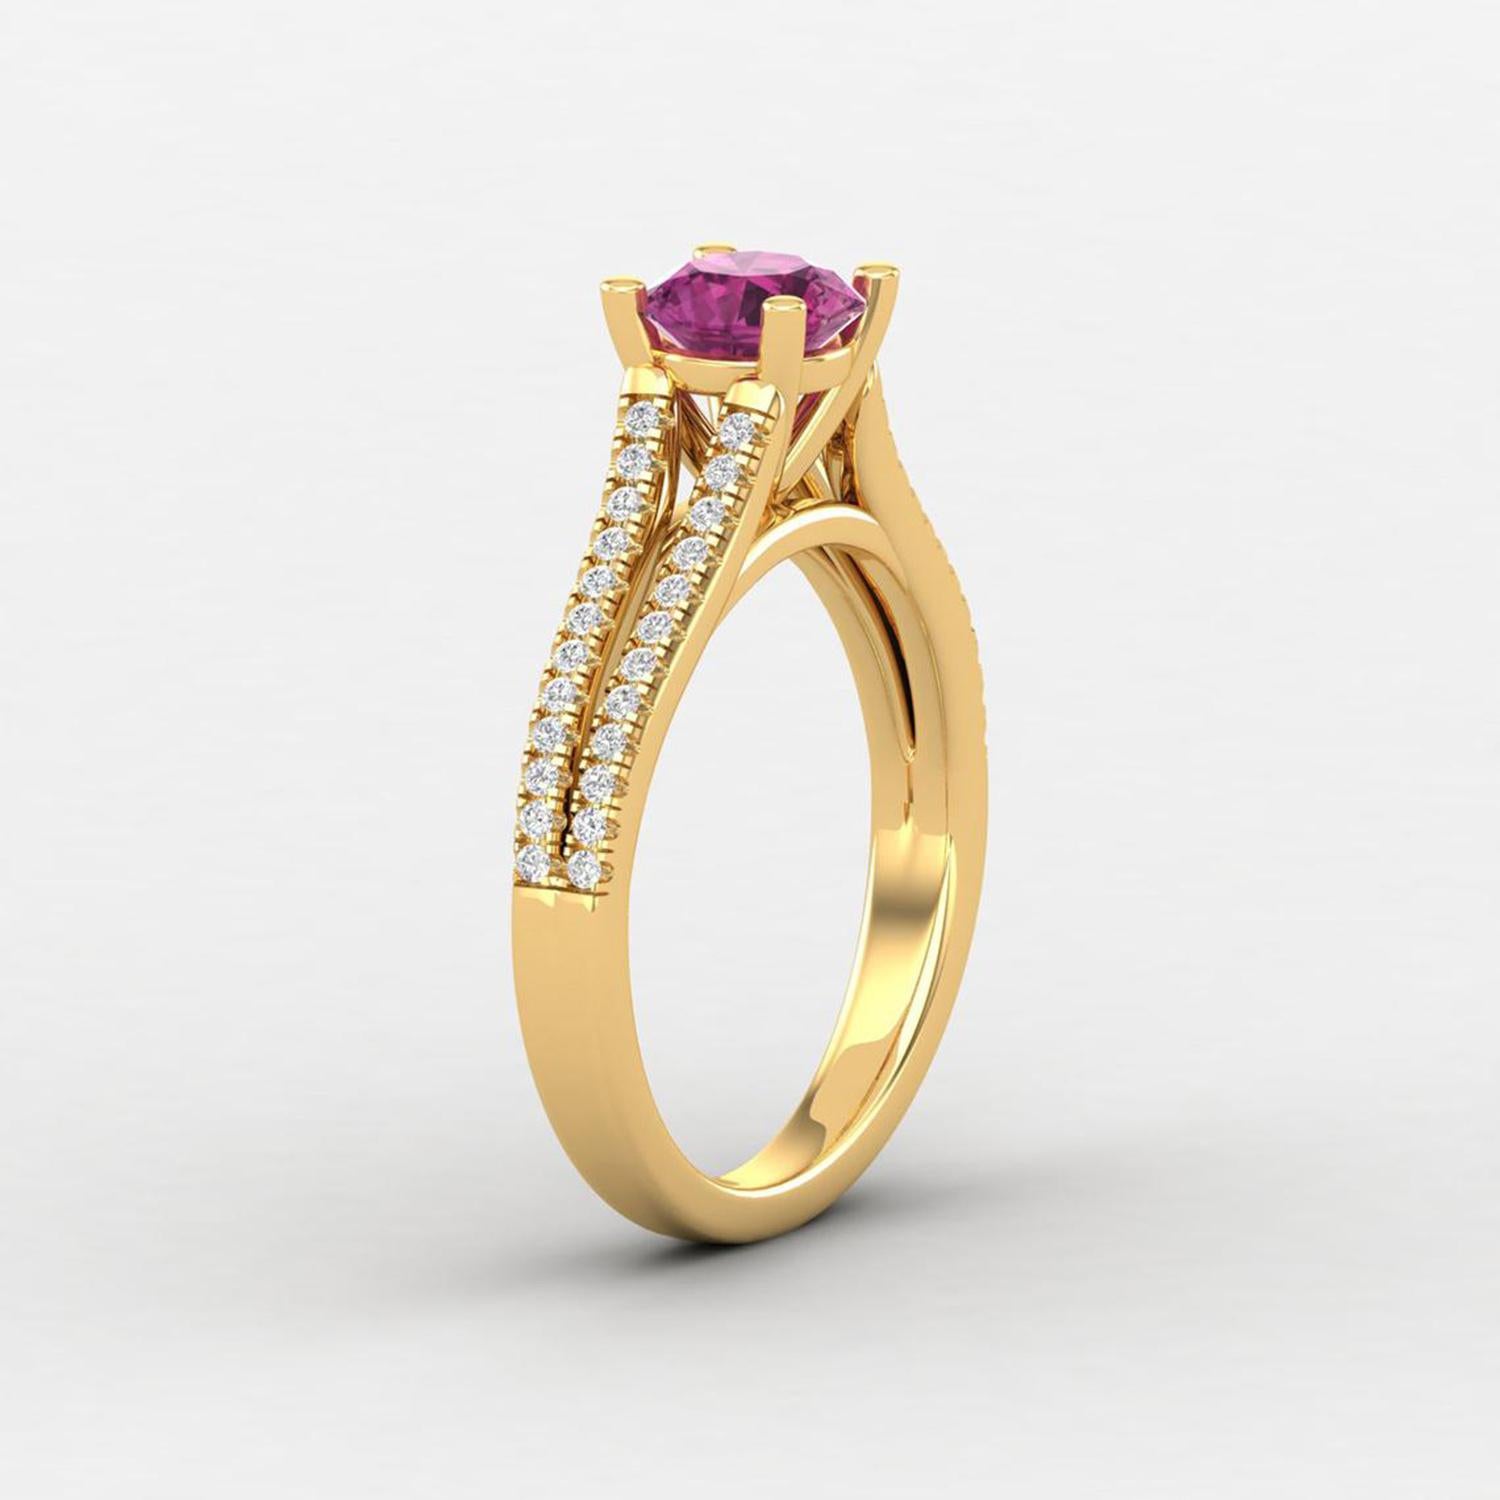 Item details:-

✦ SKU:- JRG00293YYY

✦ Product Specification:-
• Gold Kt: 14K (also available in 18K)
• Available Gold Color: Rose Gold, Yellow Gold, White Gold
• Round Rubellite Tourmaline: 1 pc 6MM
• Round Diamond (H-I) (SI): 48 pcs 1MM
• Total